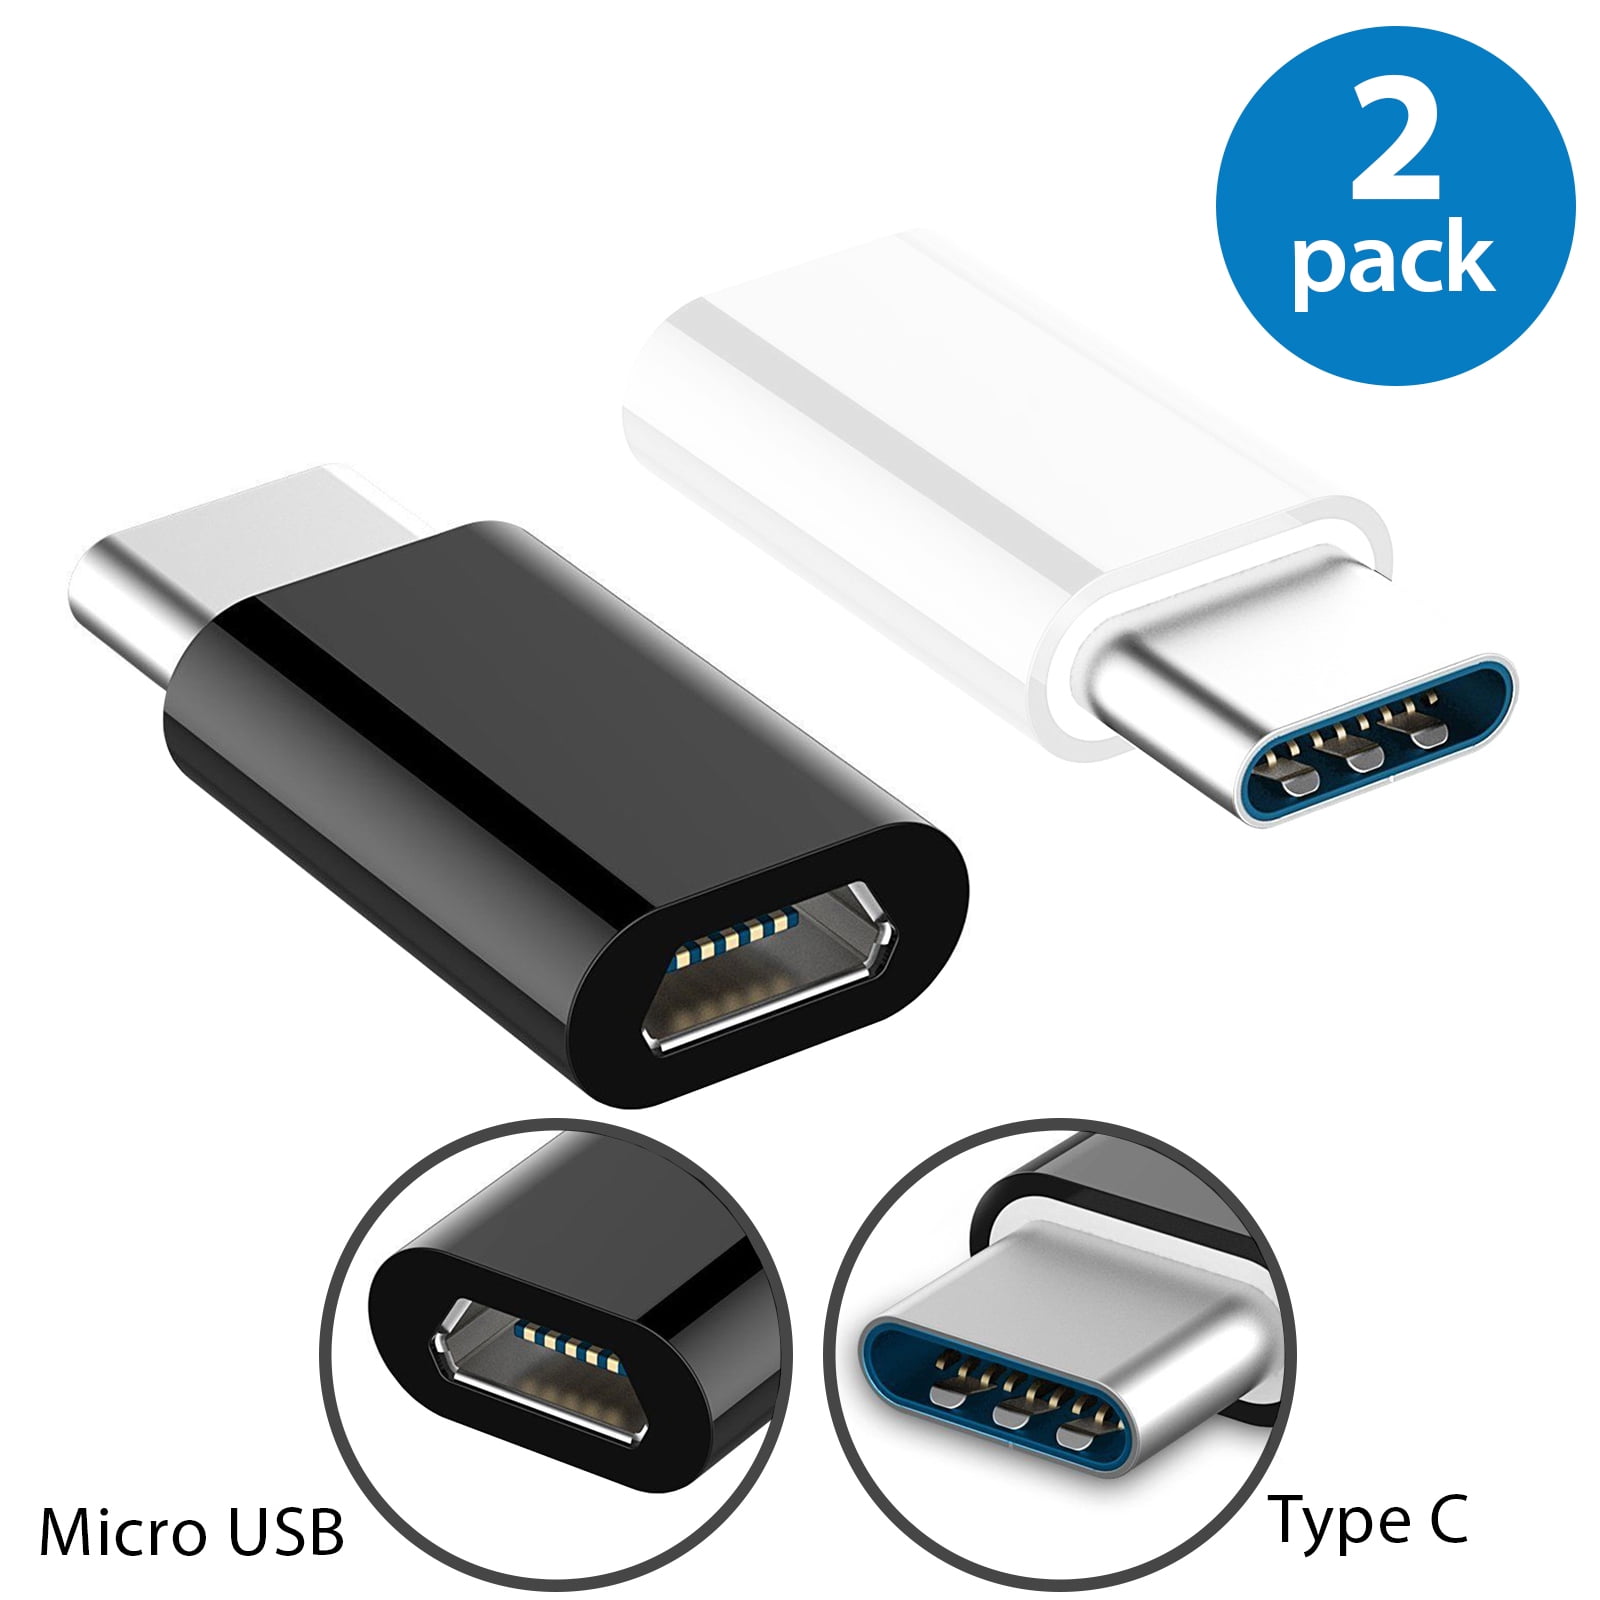 Micro USB to USB 3.1 Type C Converter Adapter for Android Samsung Galaxy S8 /S8+ 